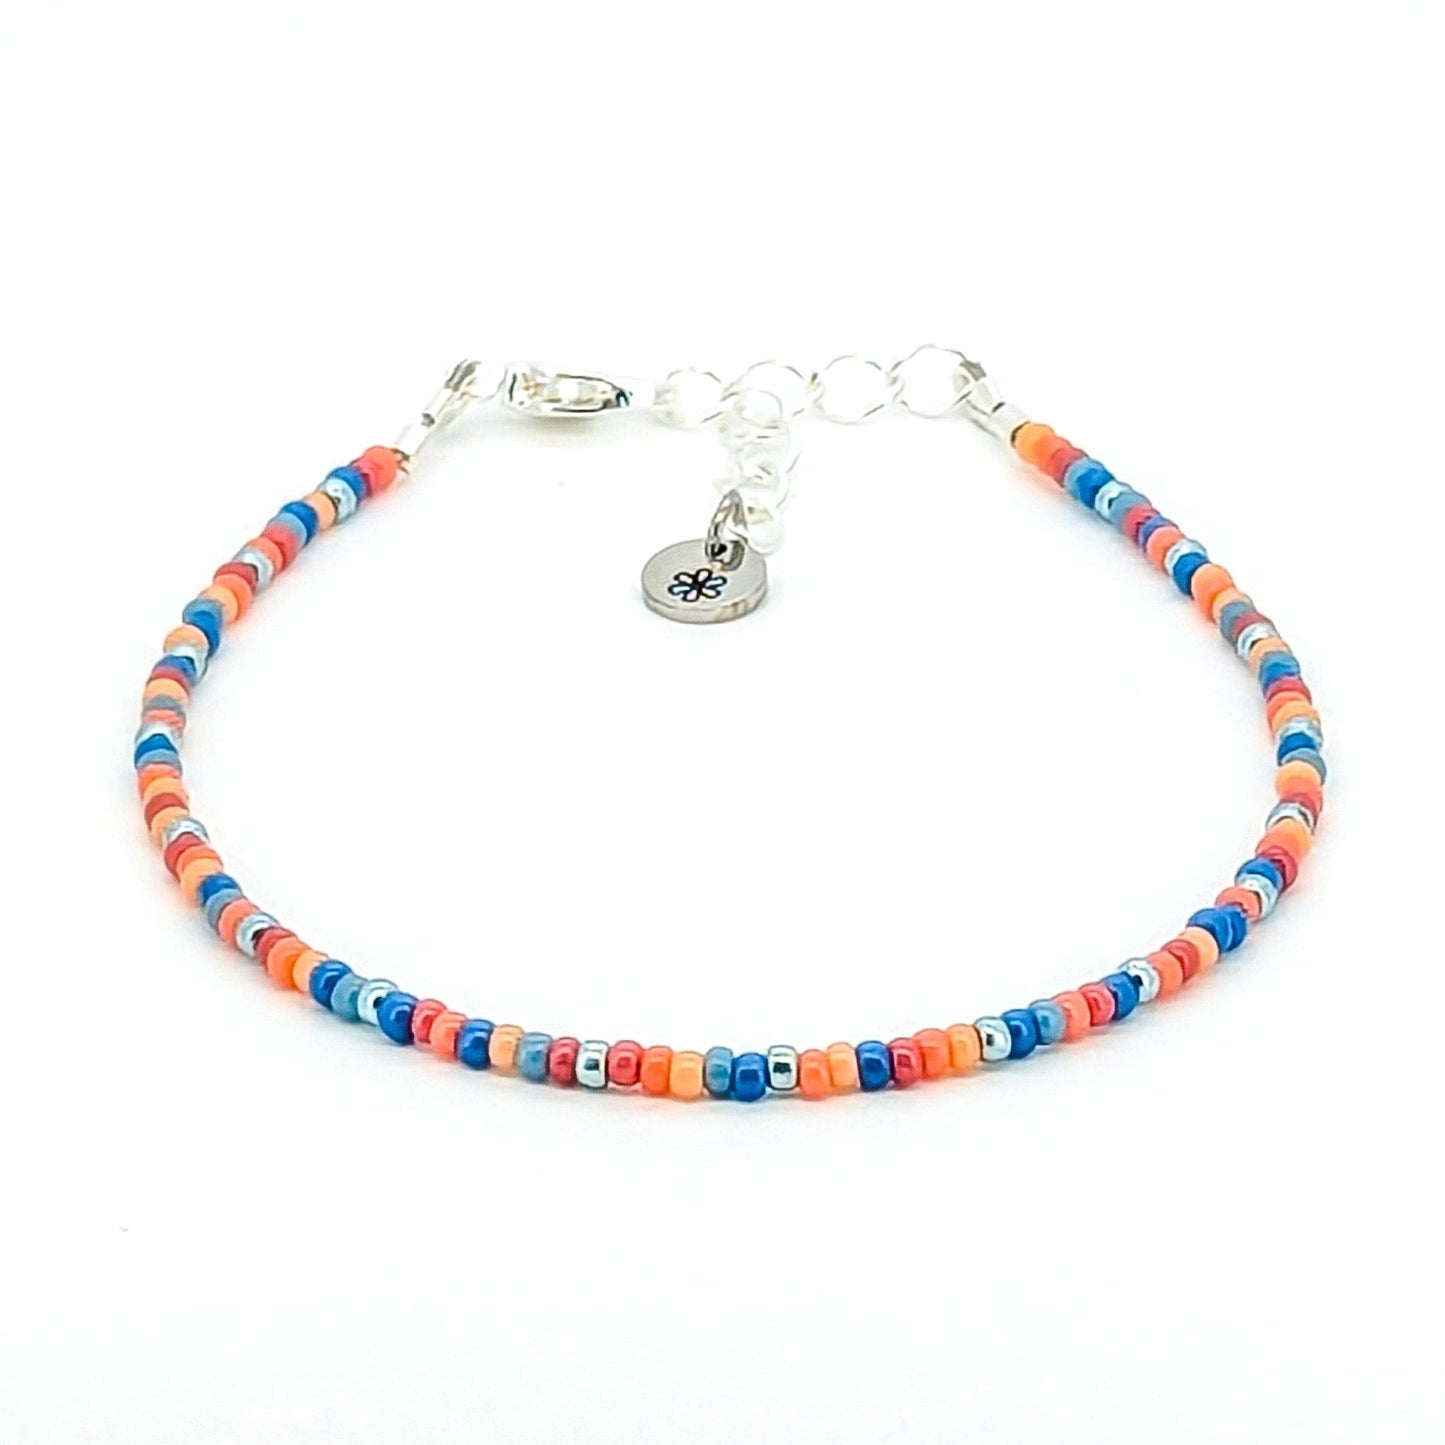 Dainty bracelet - Peach and blue glass seed beads - creations by cherie